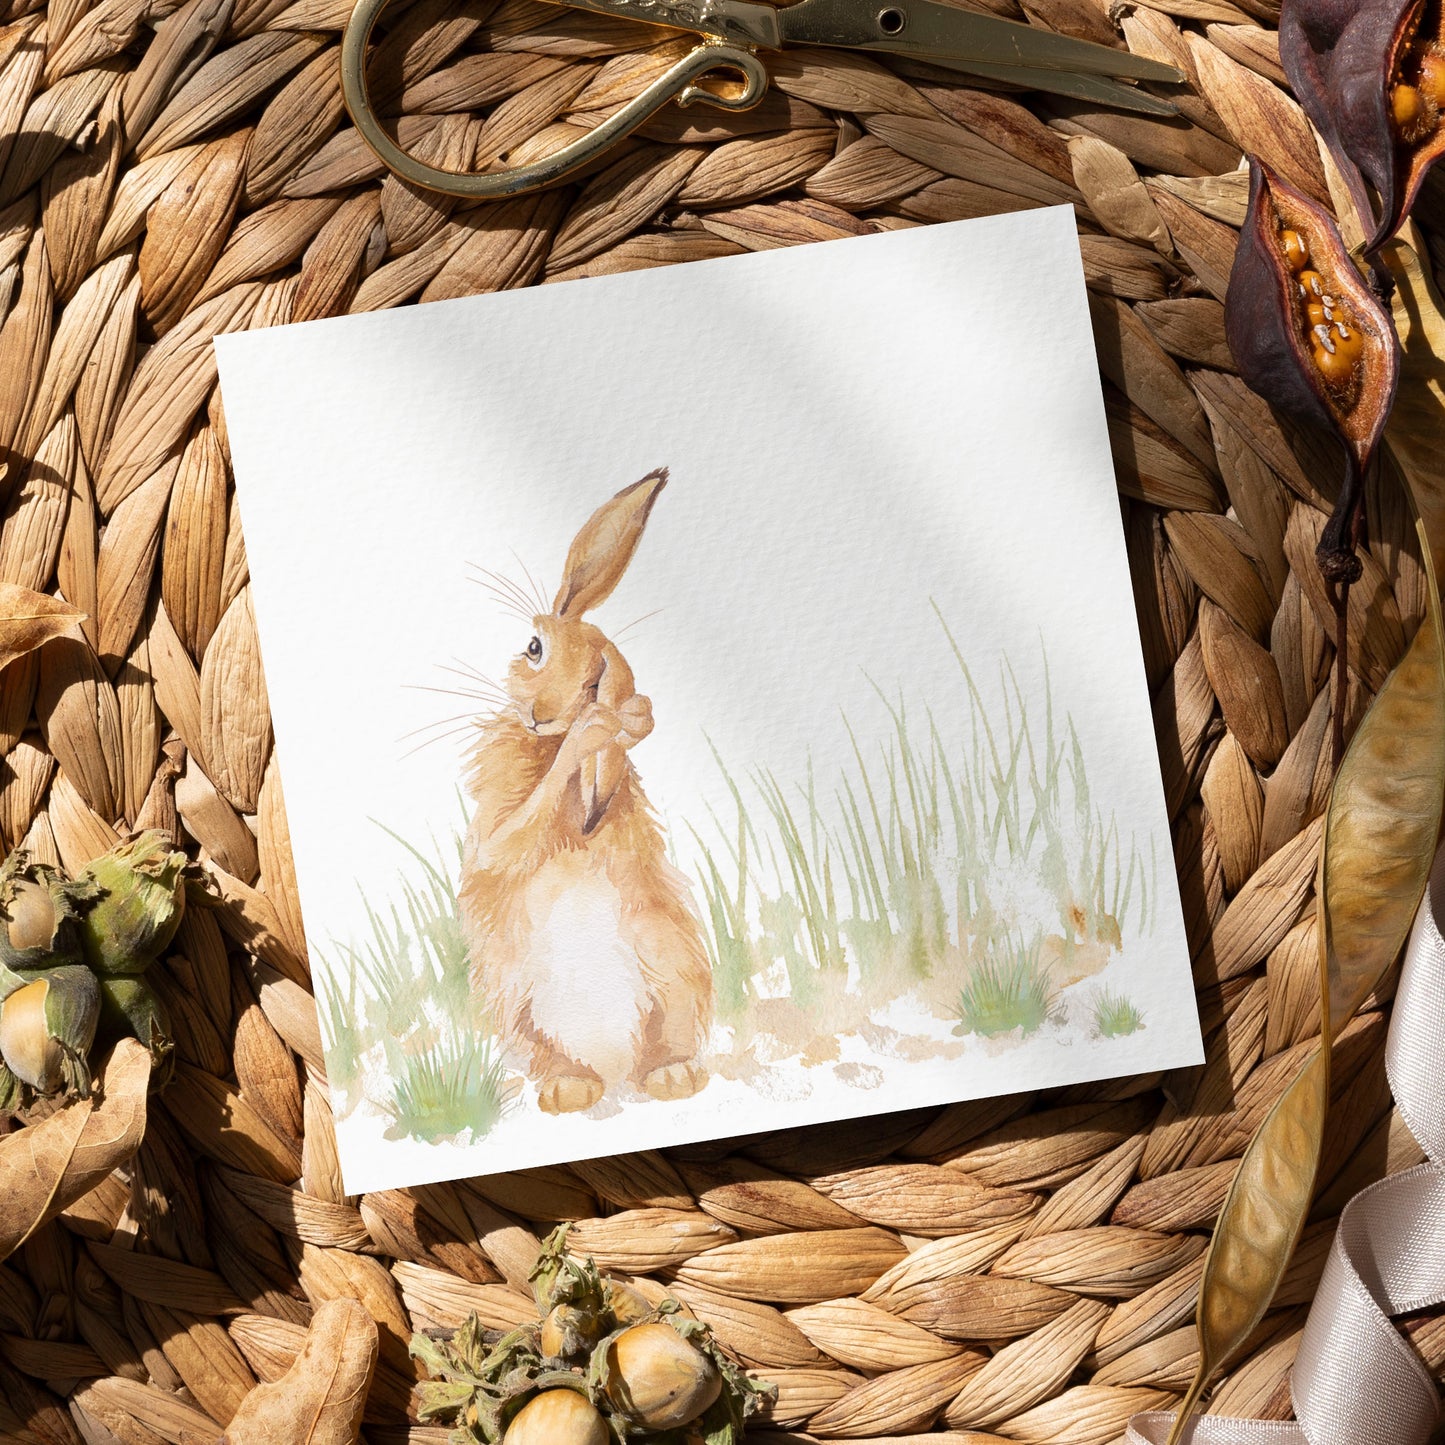 A greetings card laid flat on a table surrounded by gift wrapping items including scissors and ribbon. The card features a hare washing his ear in a watercolour style.